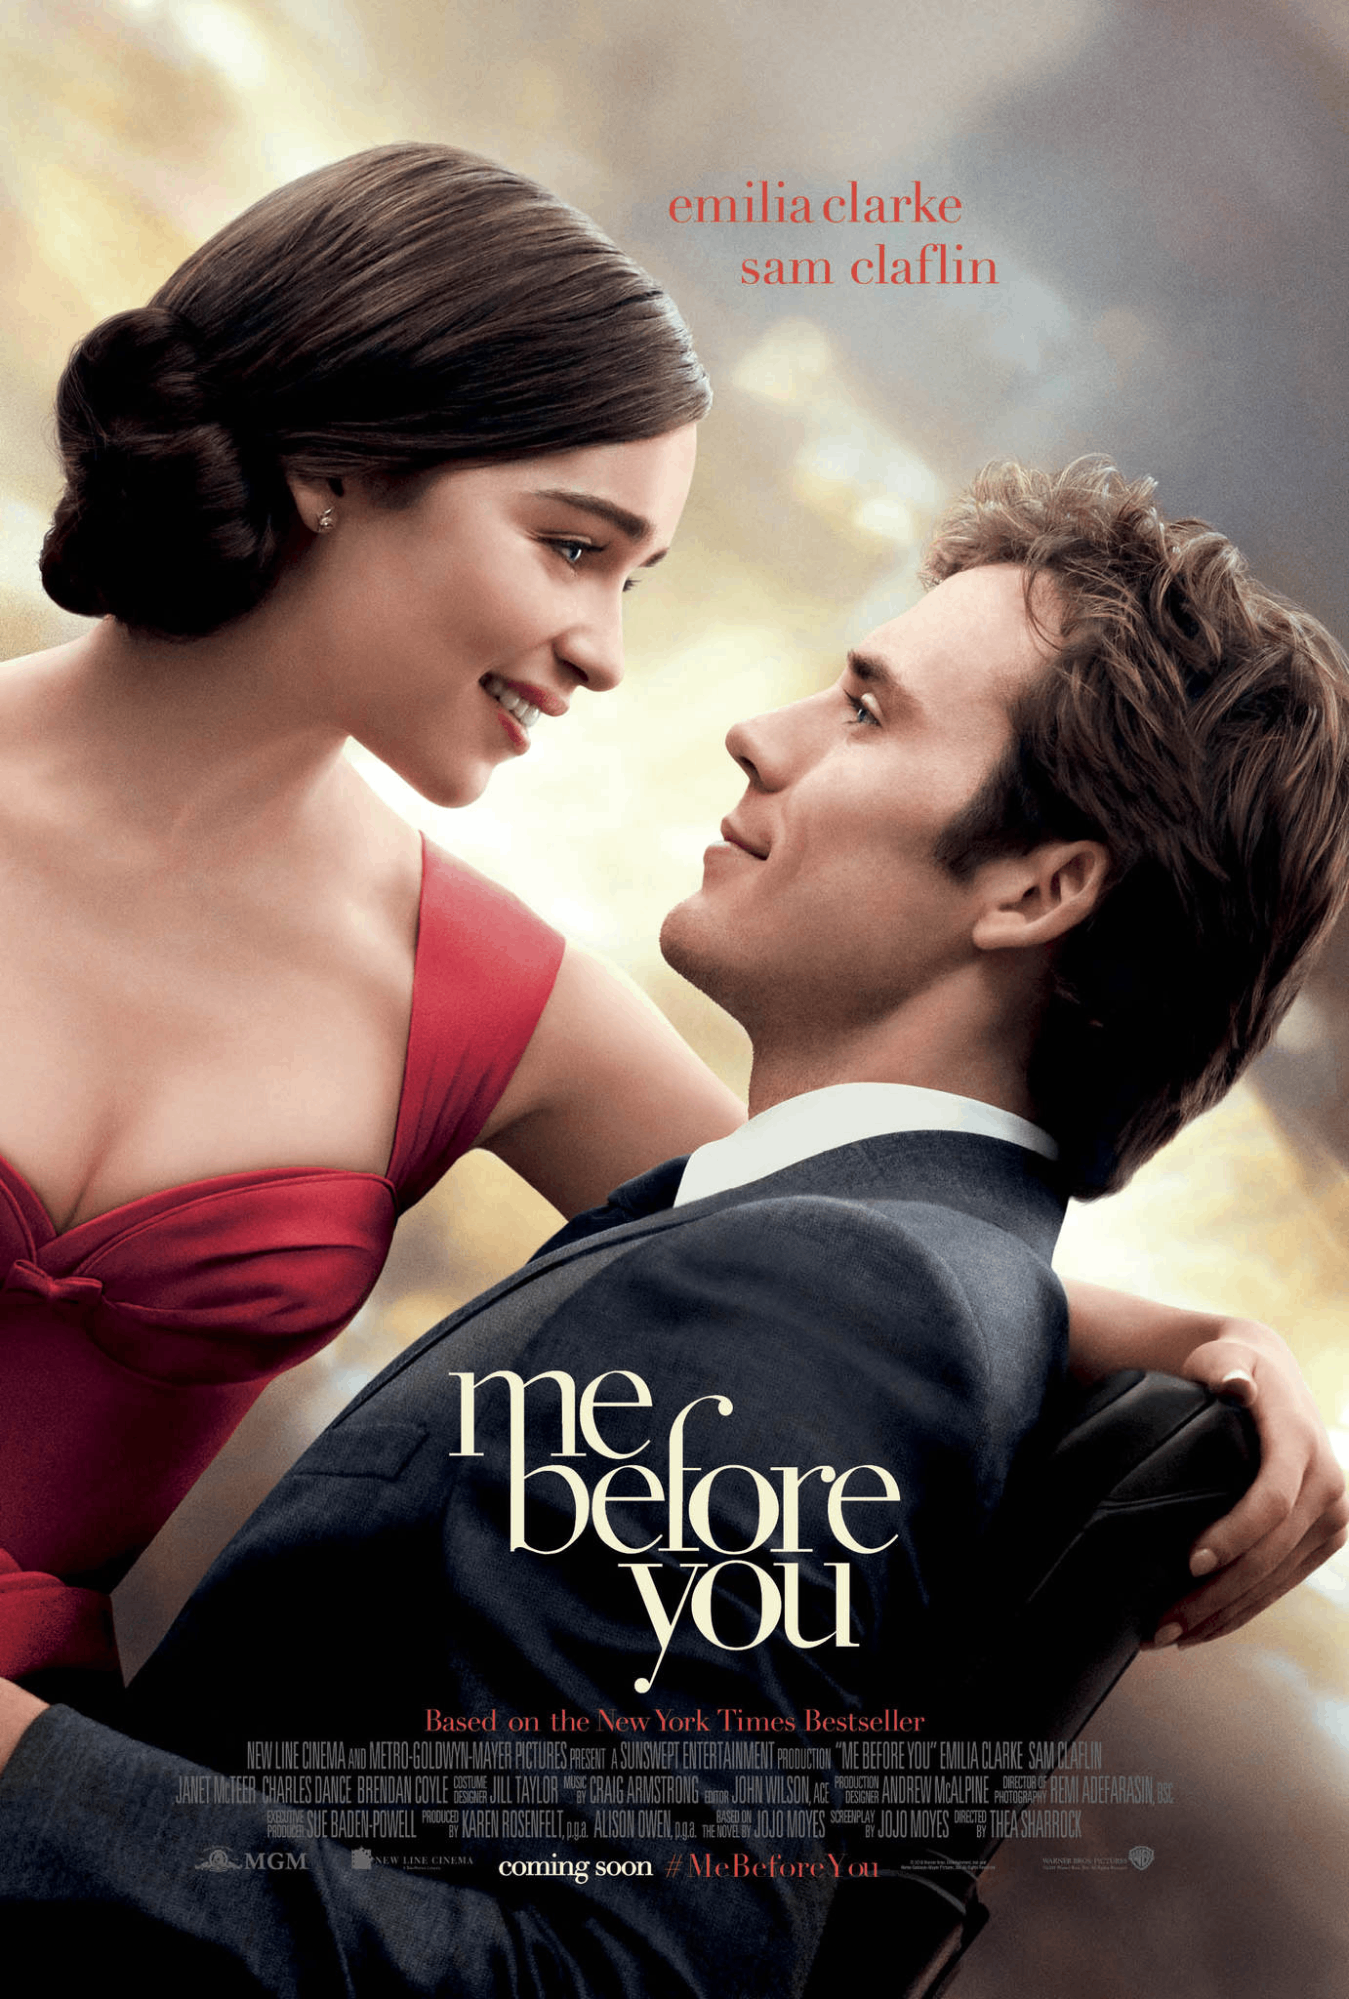 The Me Before You movie poster